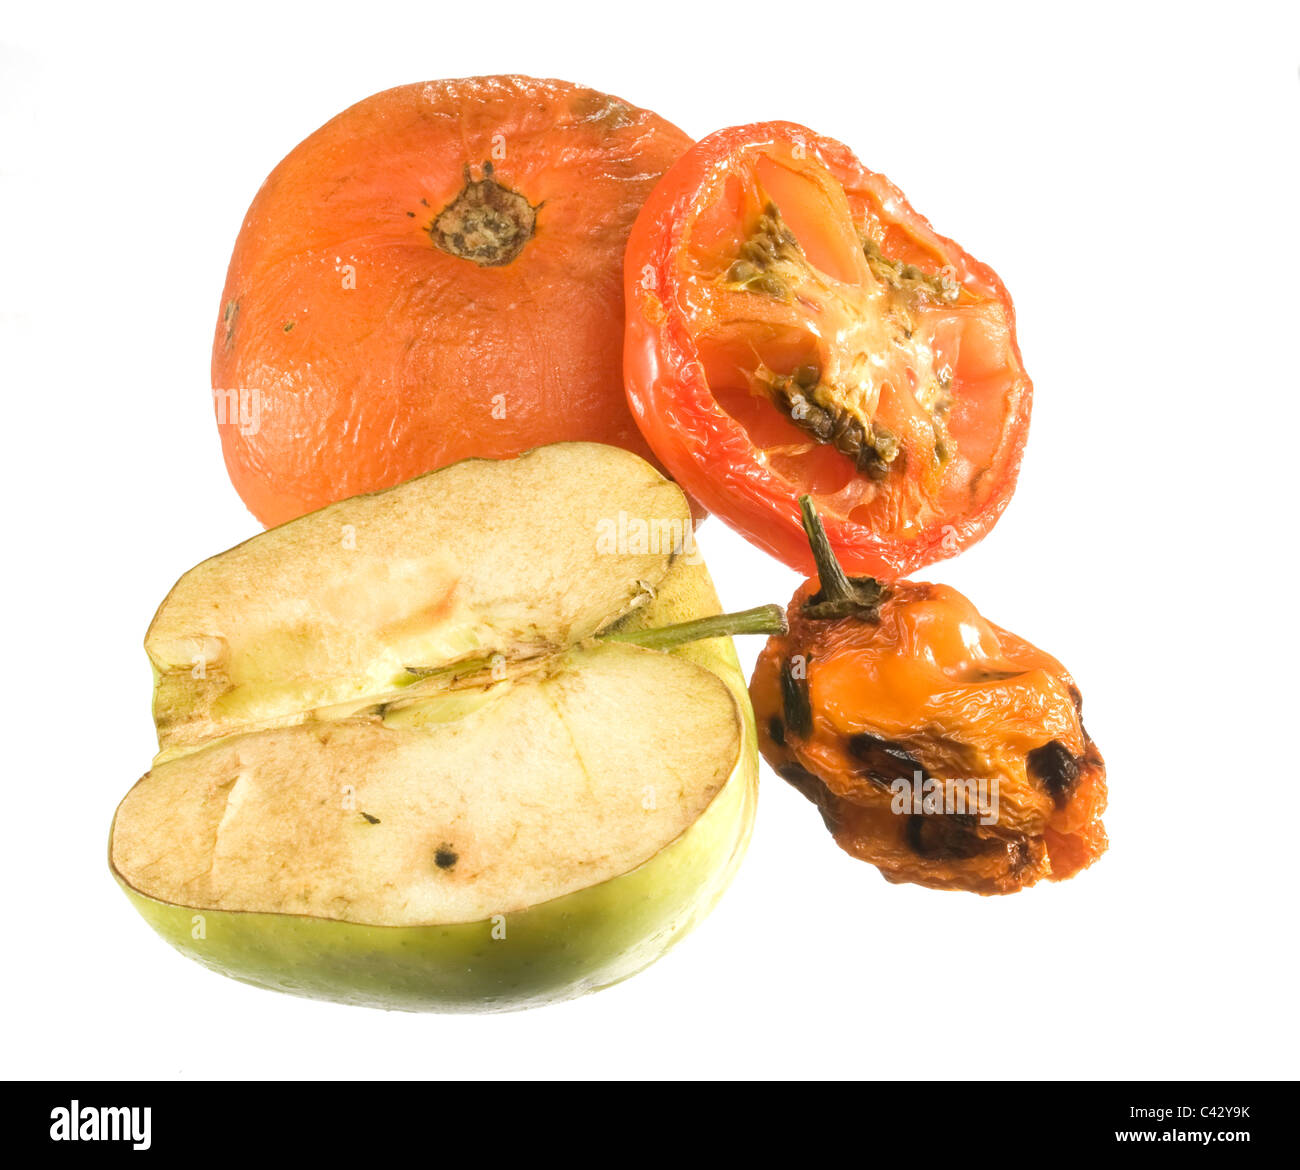 Old rotten tomatoes, a chili pepper and an apple which had all been left  in a refrigerator for a few weeks and are decaying. Stock Photo